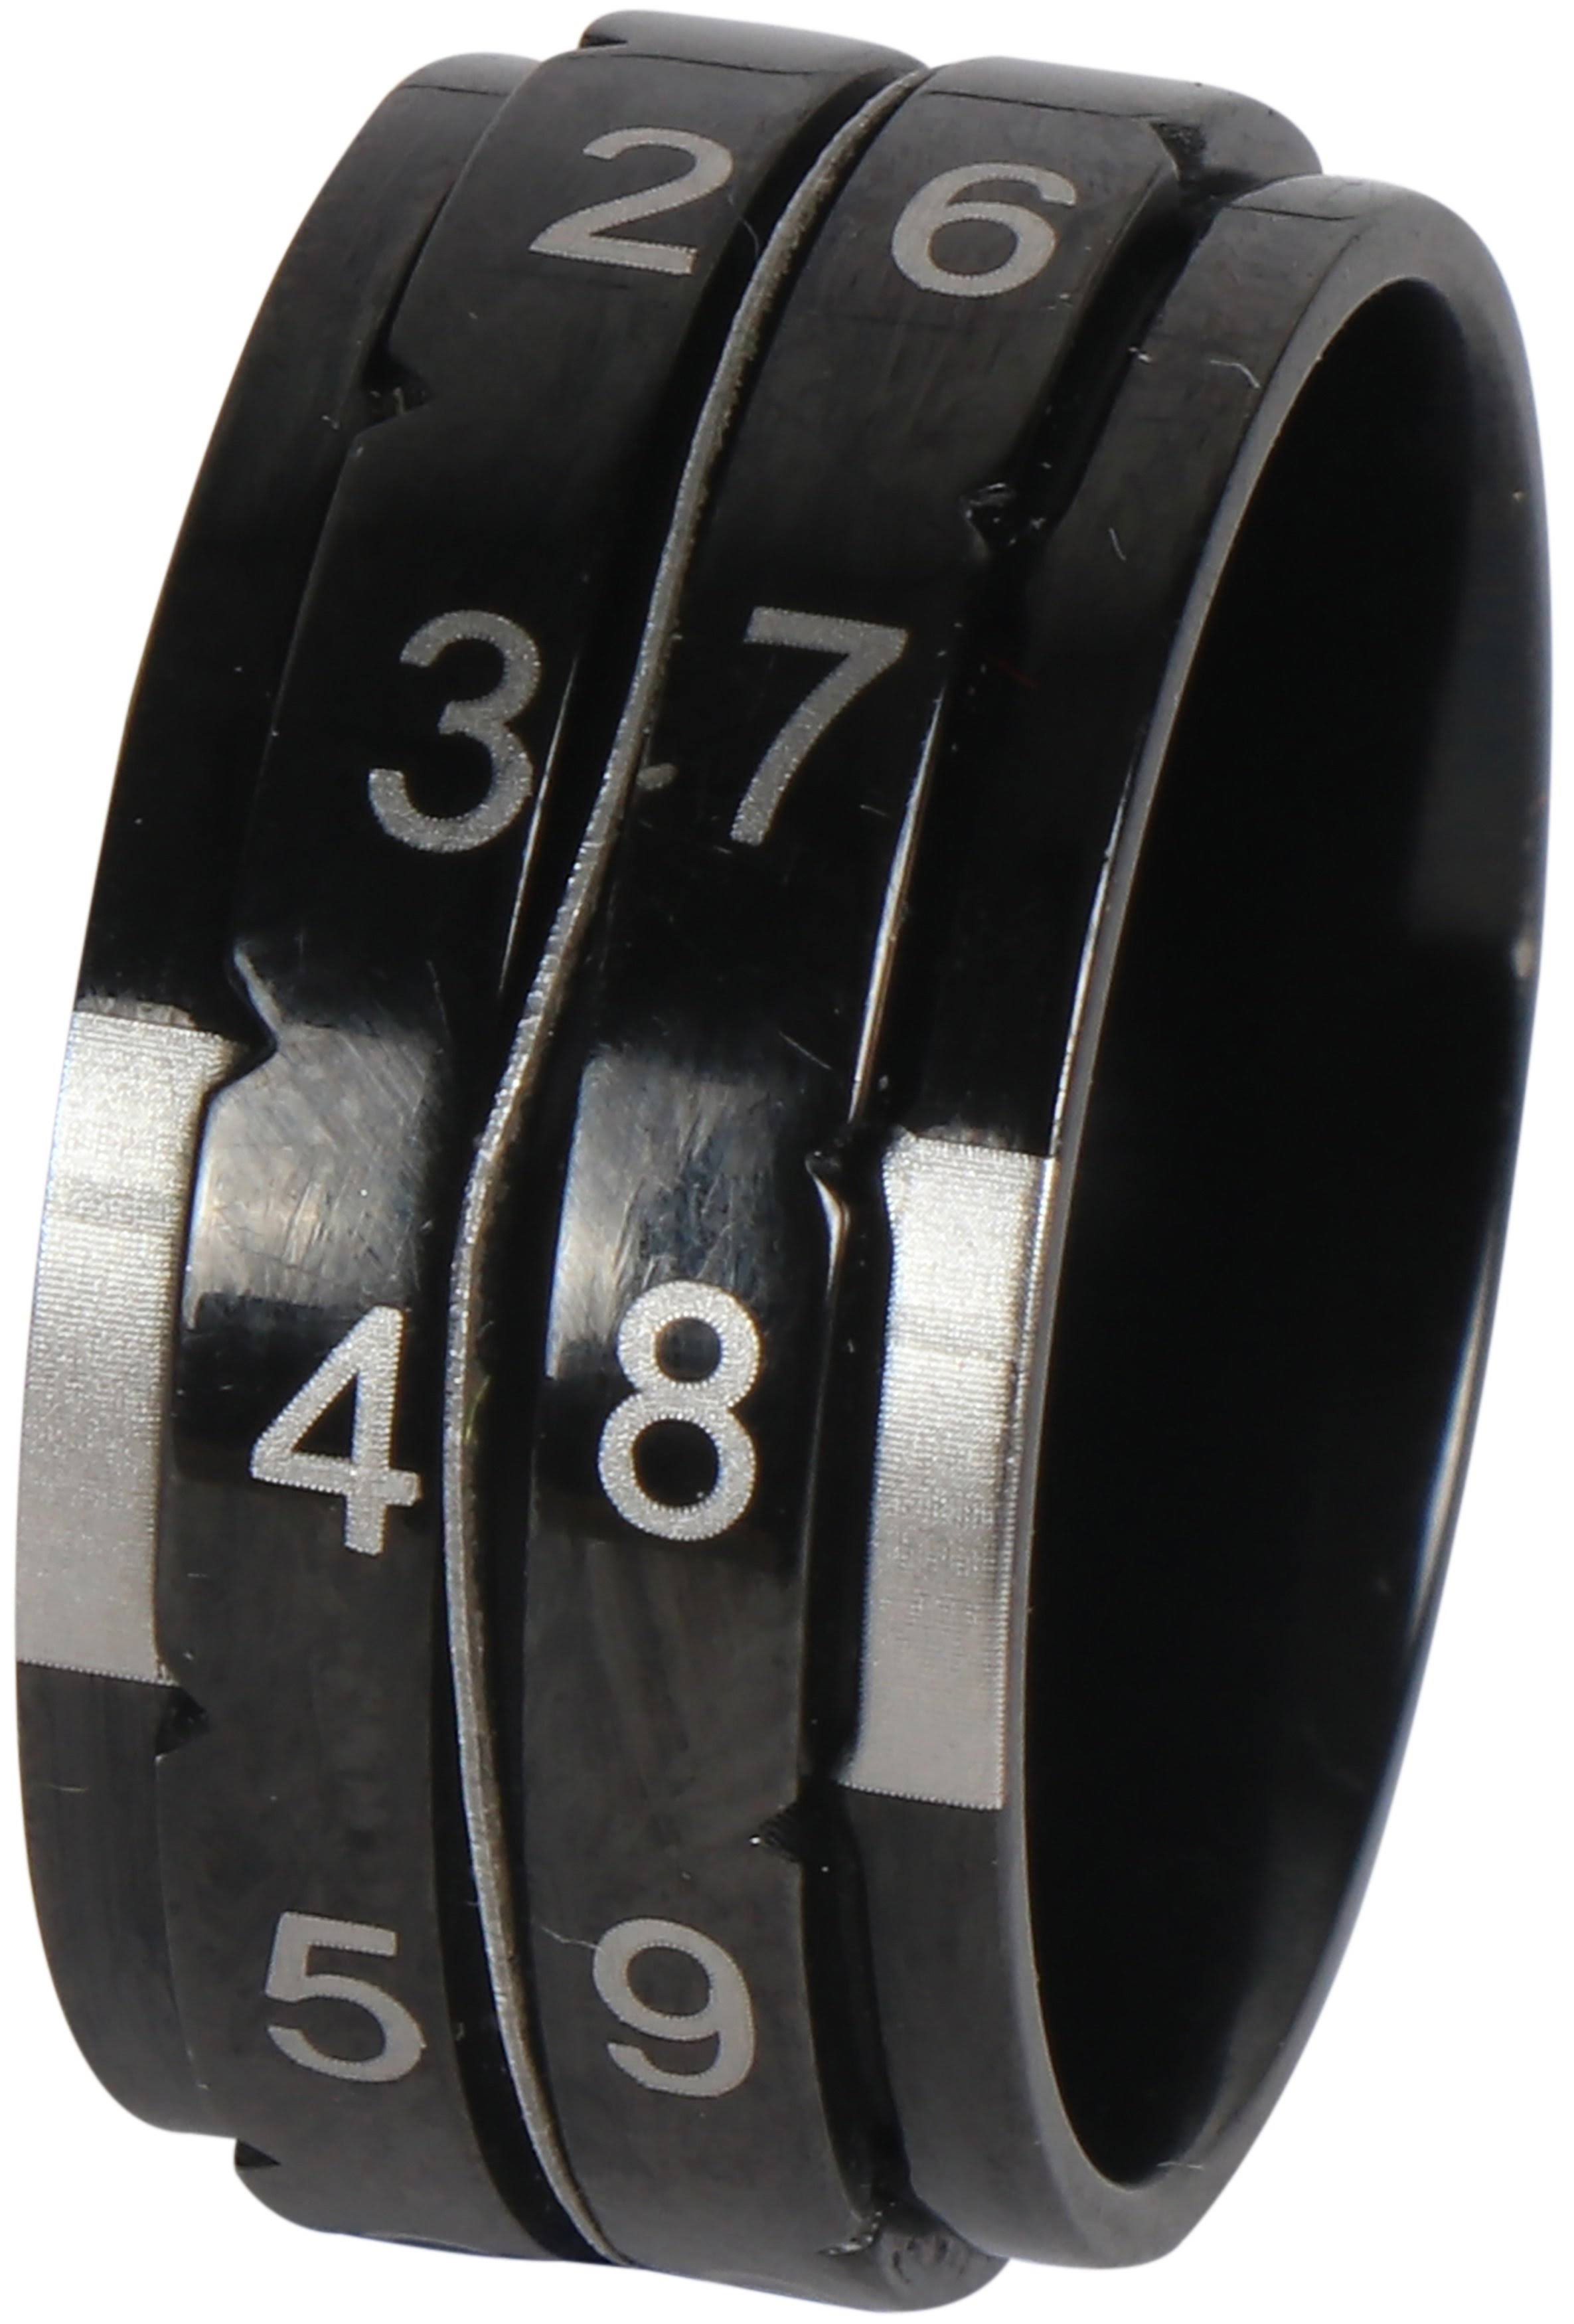 Knitter's Pride Row Counter Ring Size 7 17.3mm Diameter